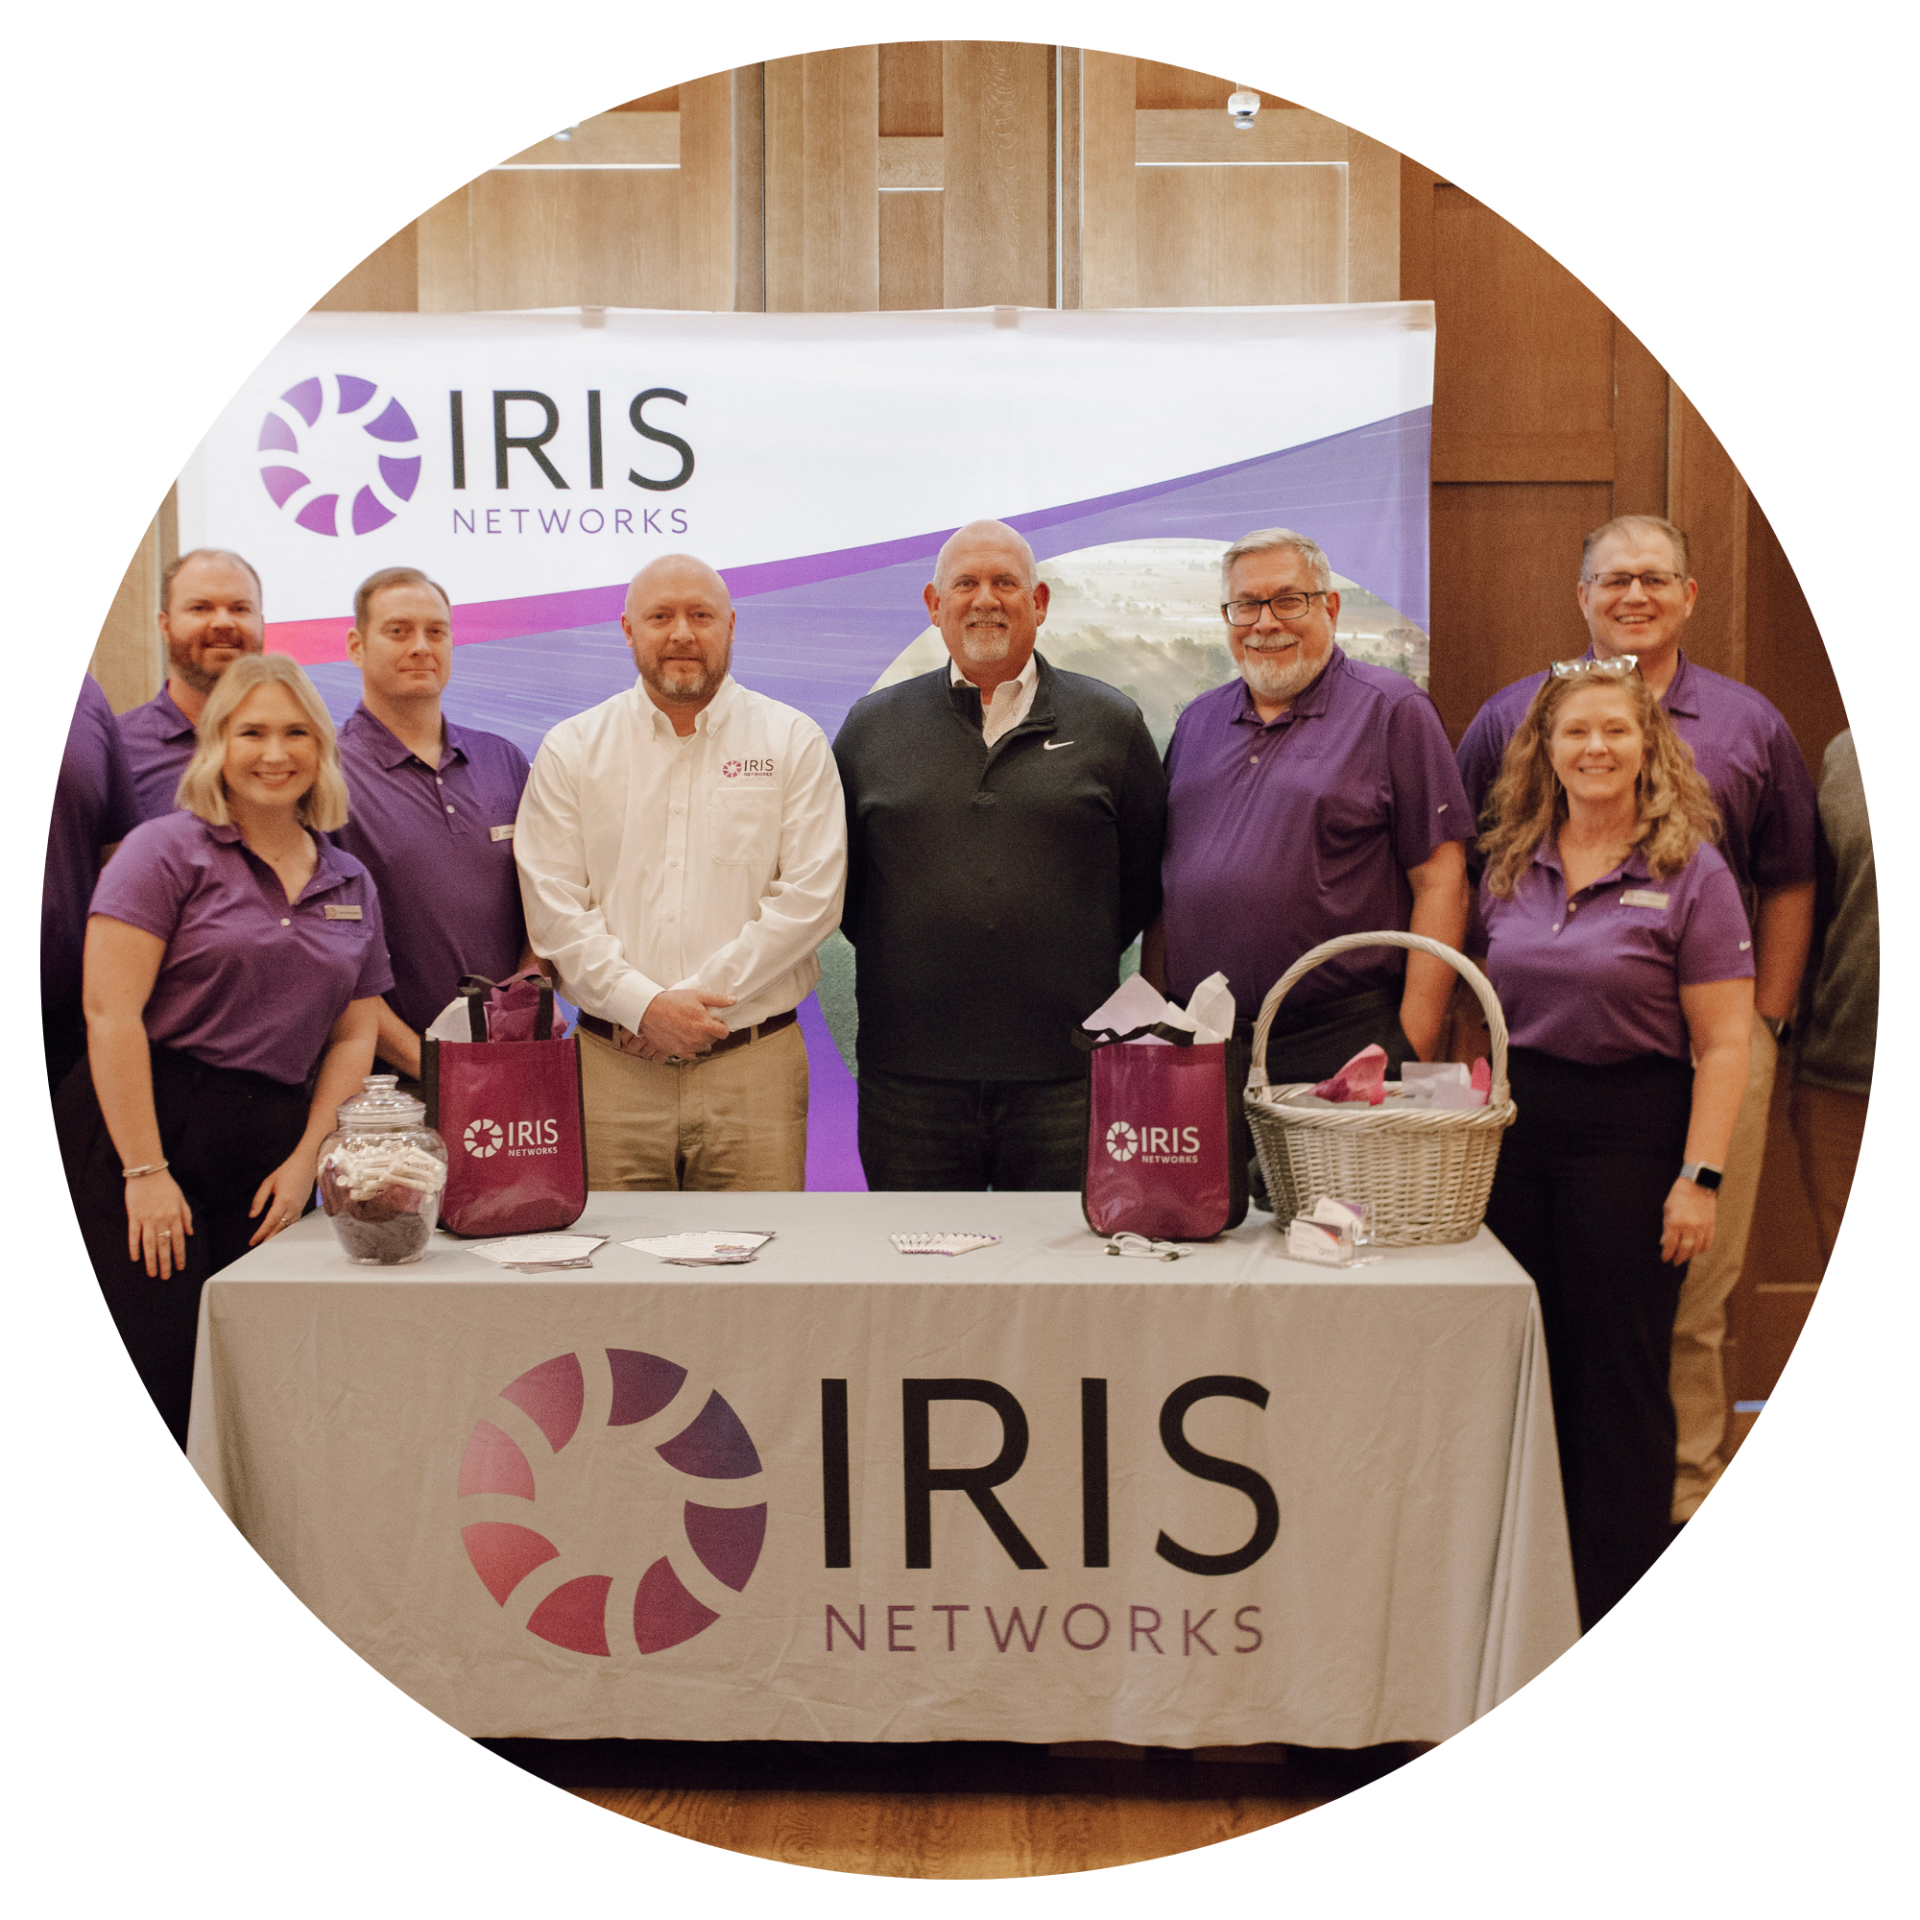 Members of IRIS Networks Team posing for a picture while standing behind the company's table with the IRIS banner at the back